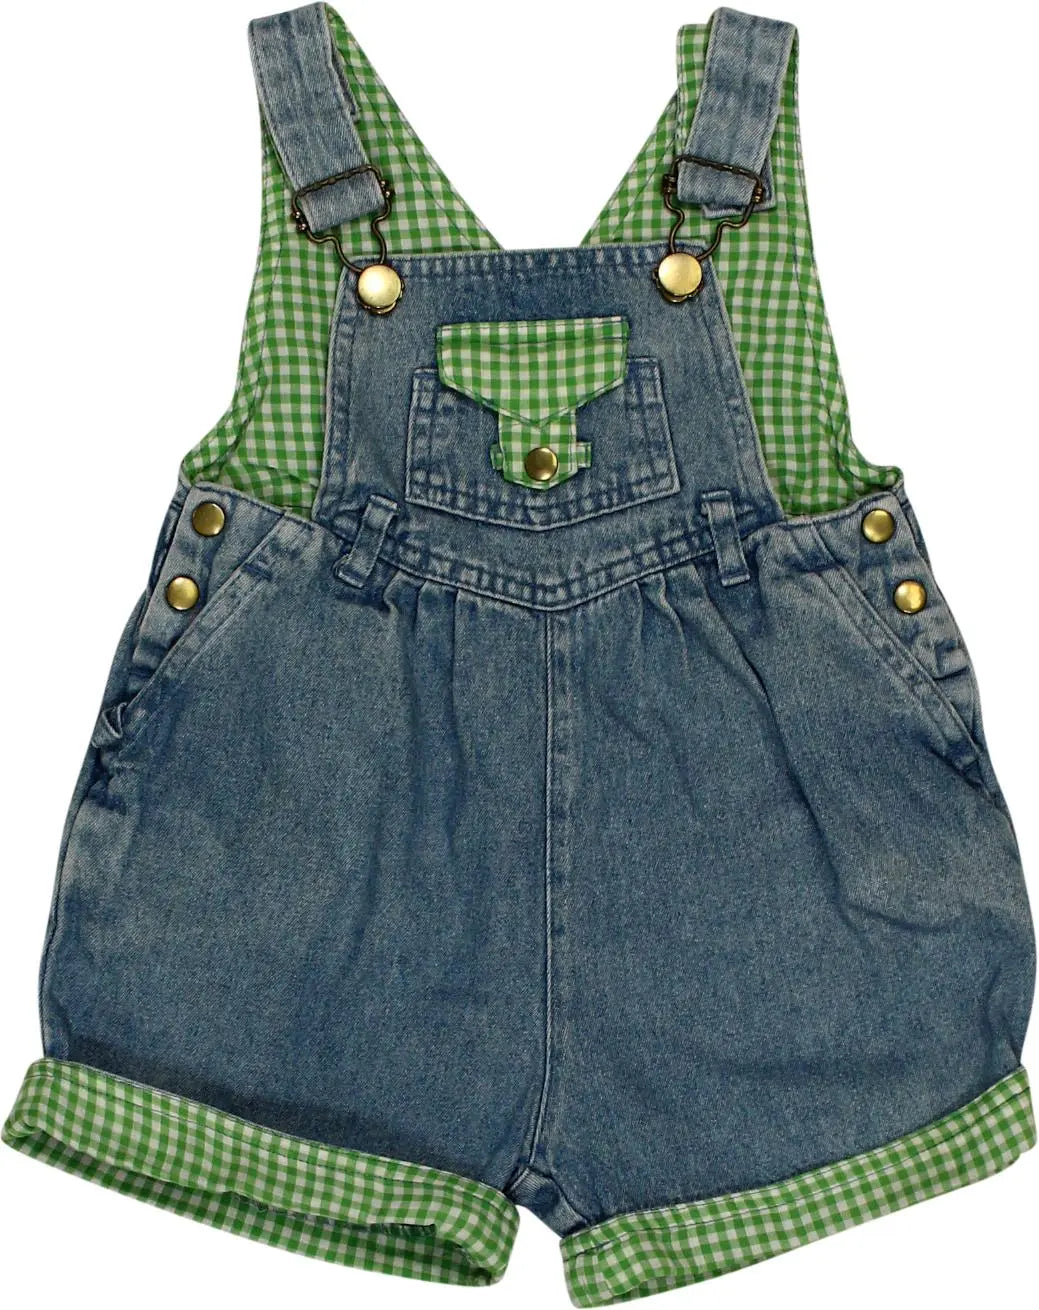 Unknown - Dungarees- ThriftTale.com - Vintage and second handclothing